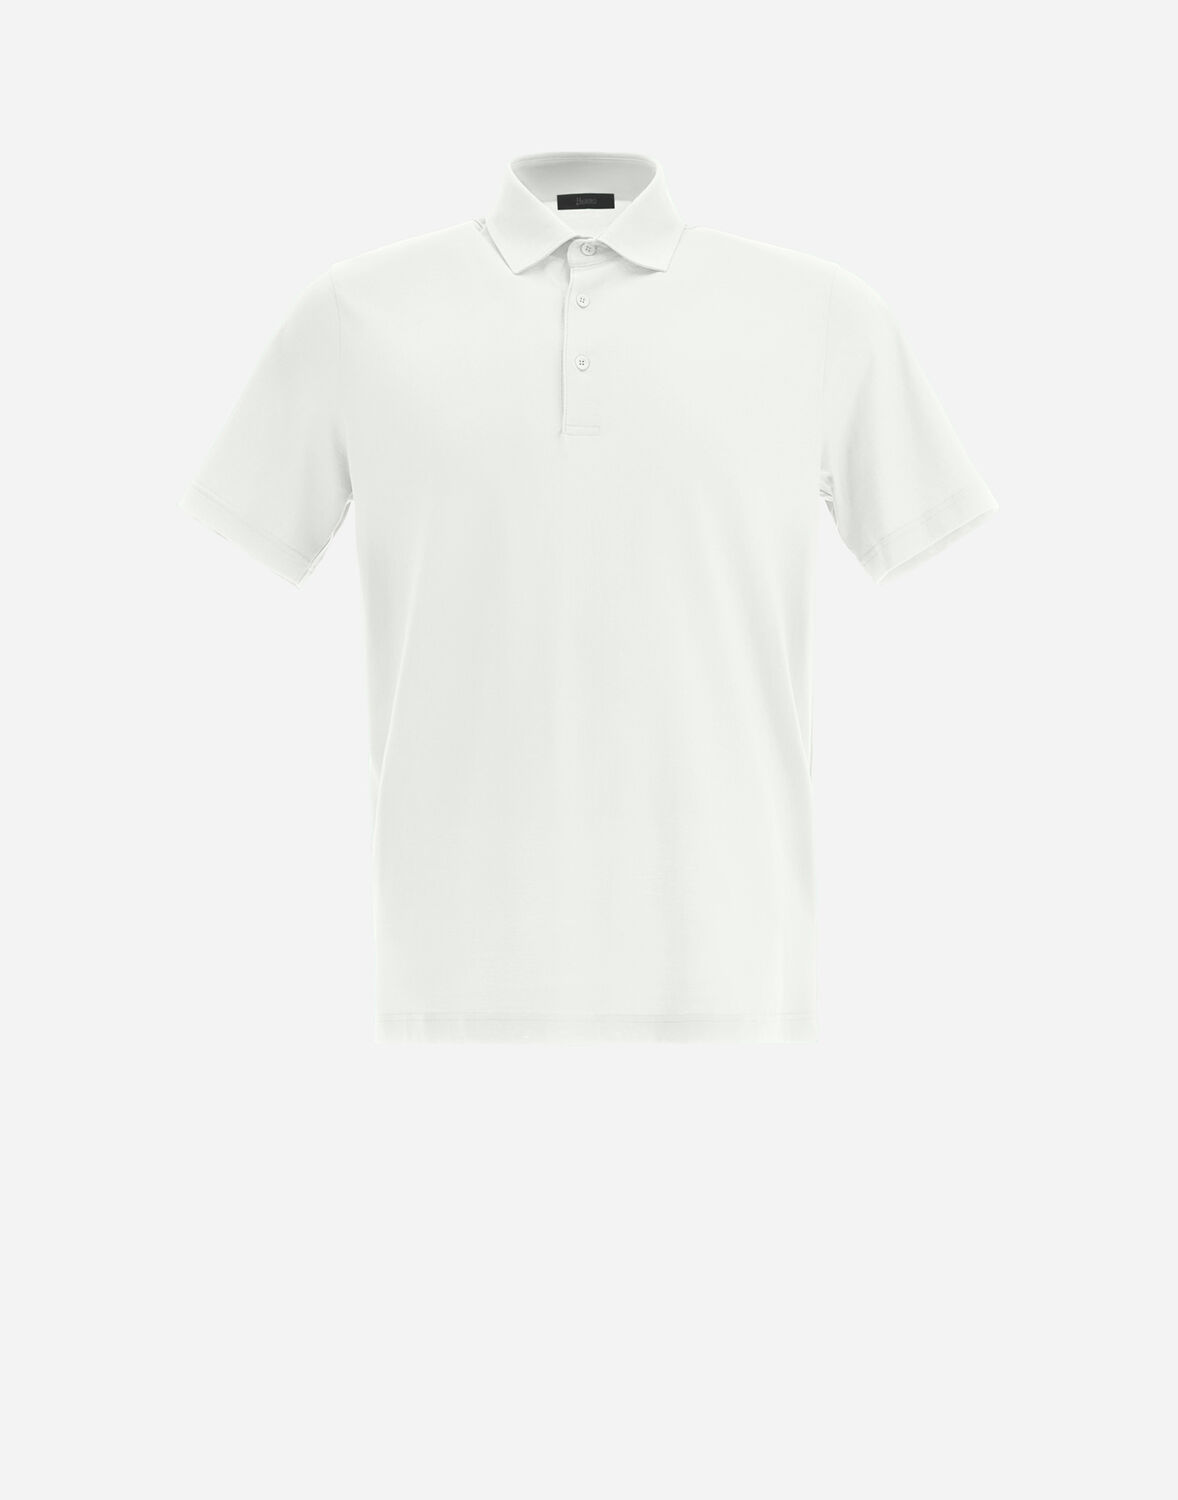 Herno Polo Shirt In Crepe Jersey - Male Men New Arrivals White 60